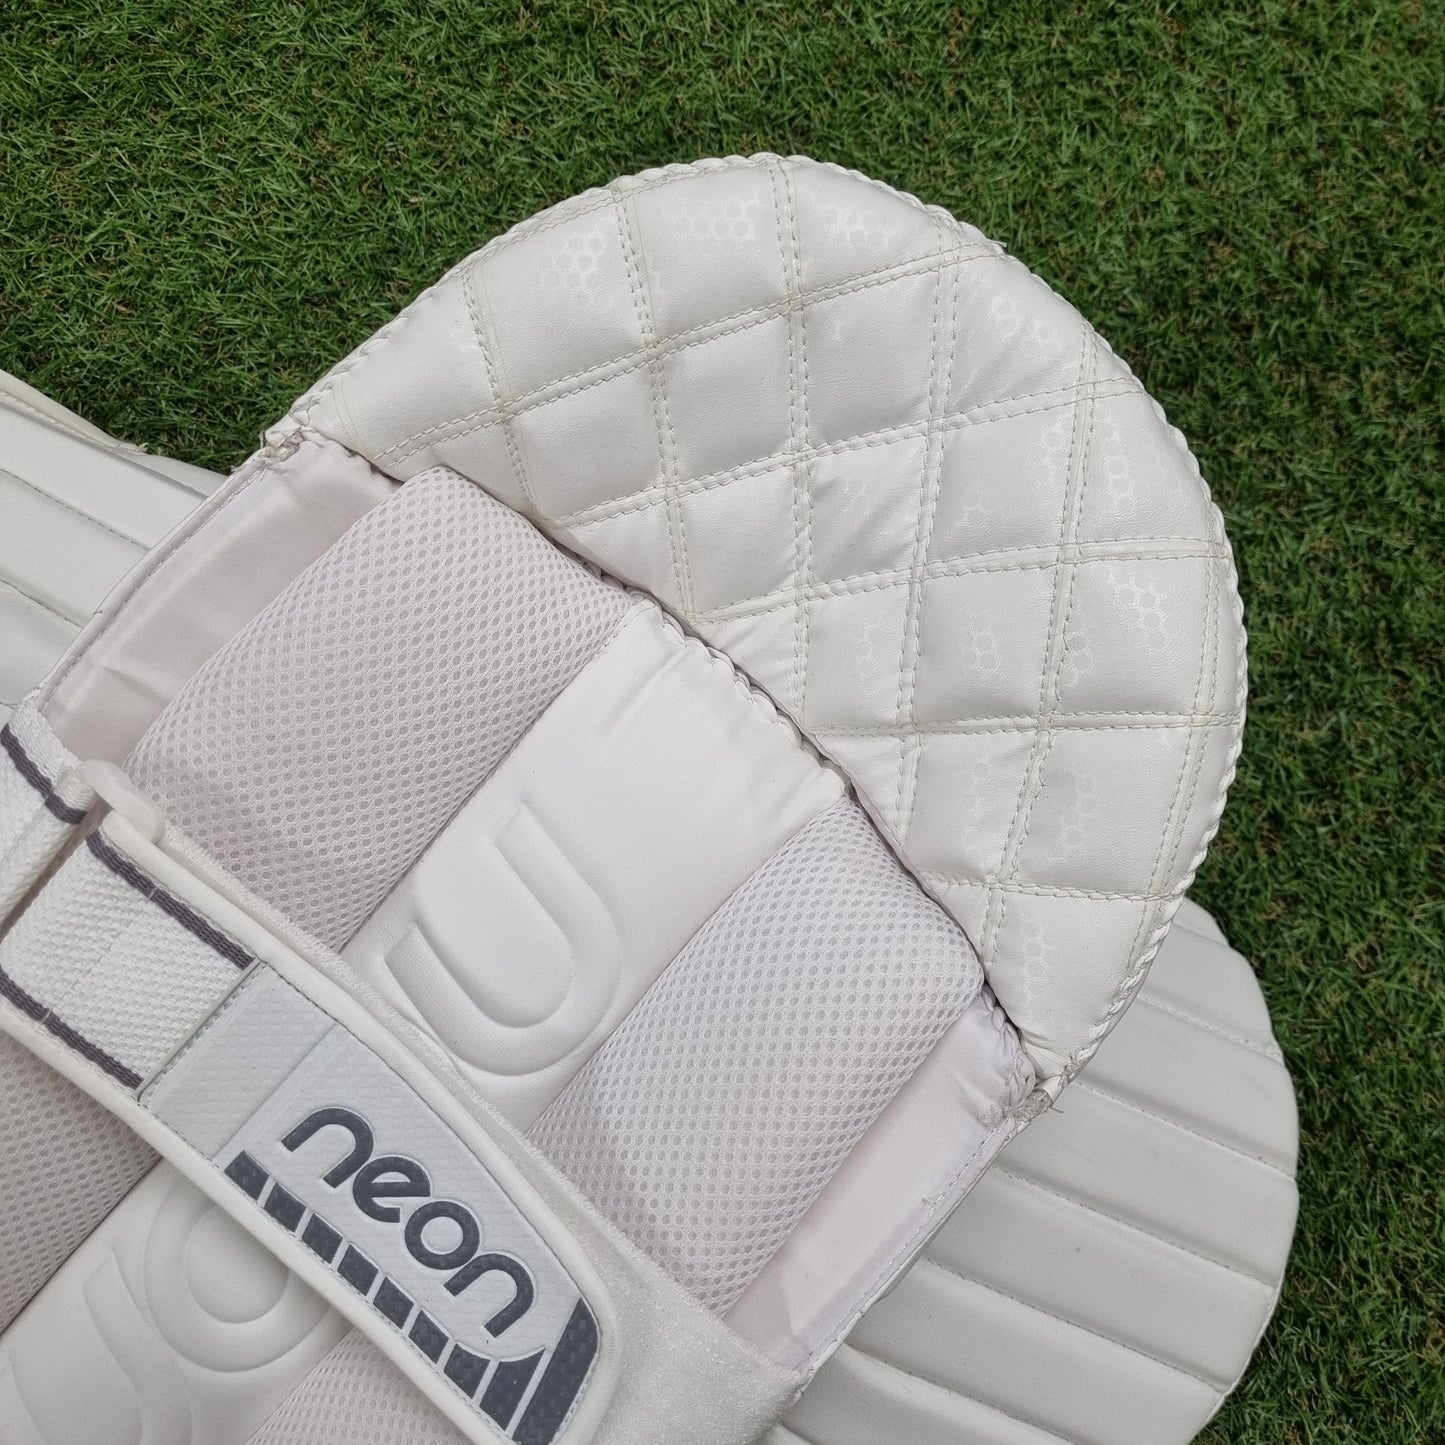 Pro Players Wicket Keeping Pads